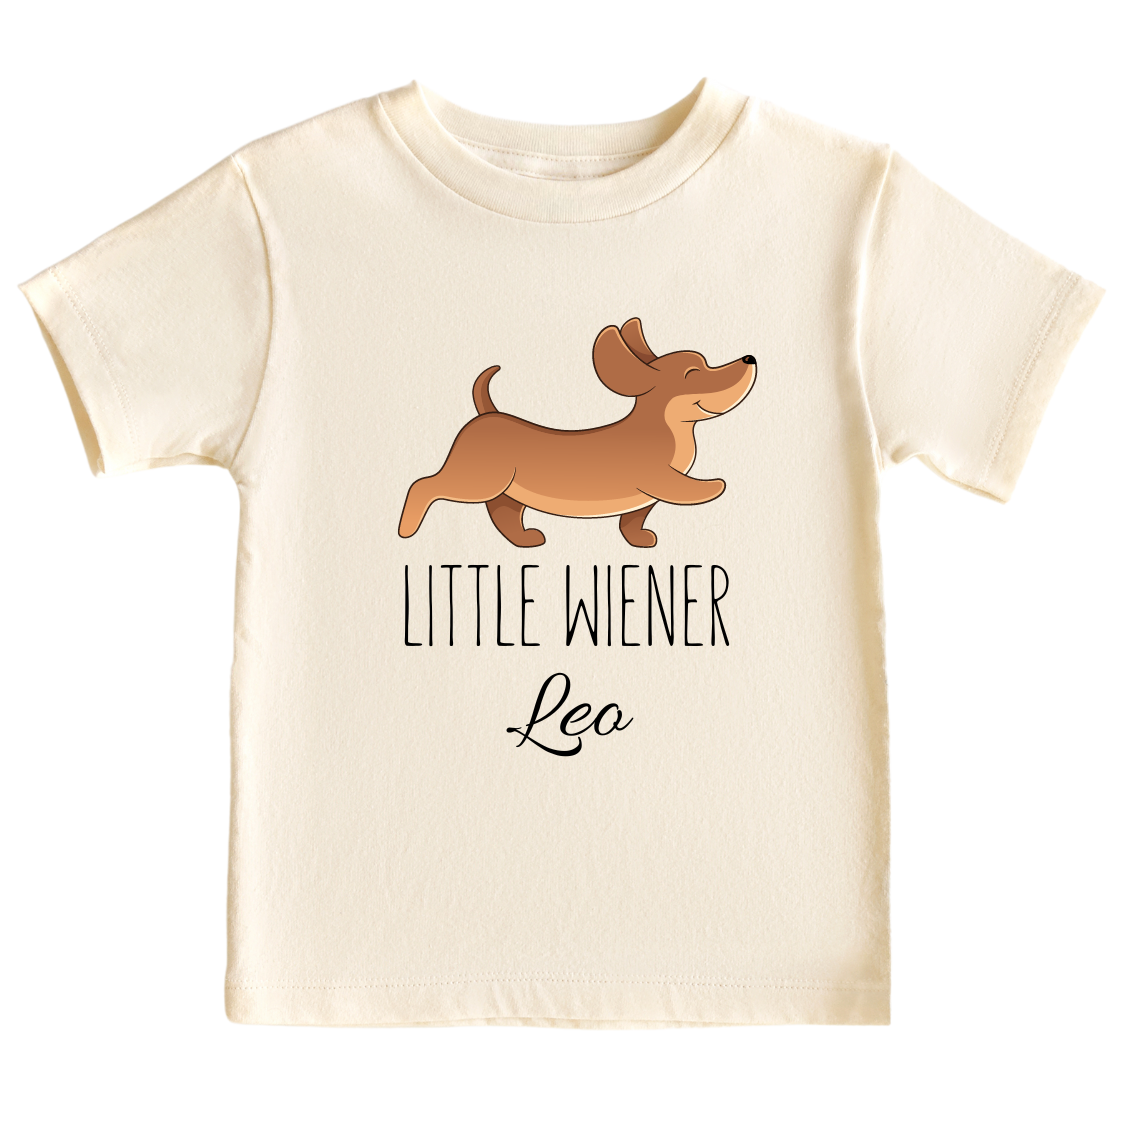 Kid's t-shirt with a cute Dachshund design and 'Little Wiener' text, customizable with names.